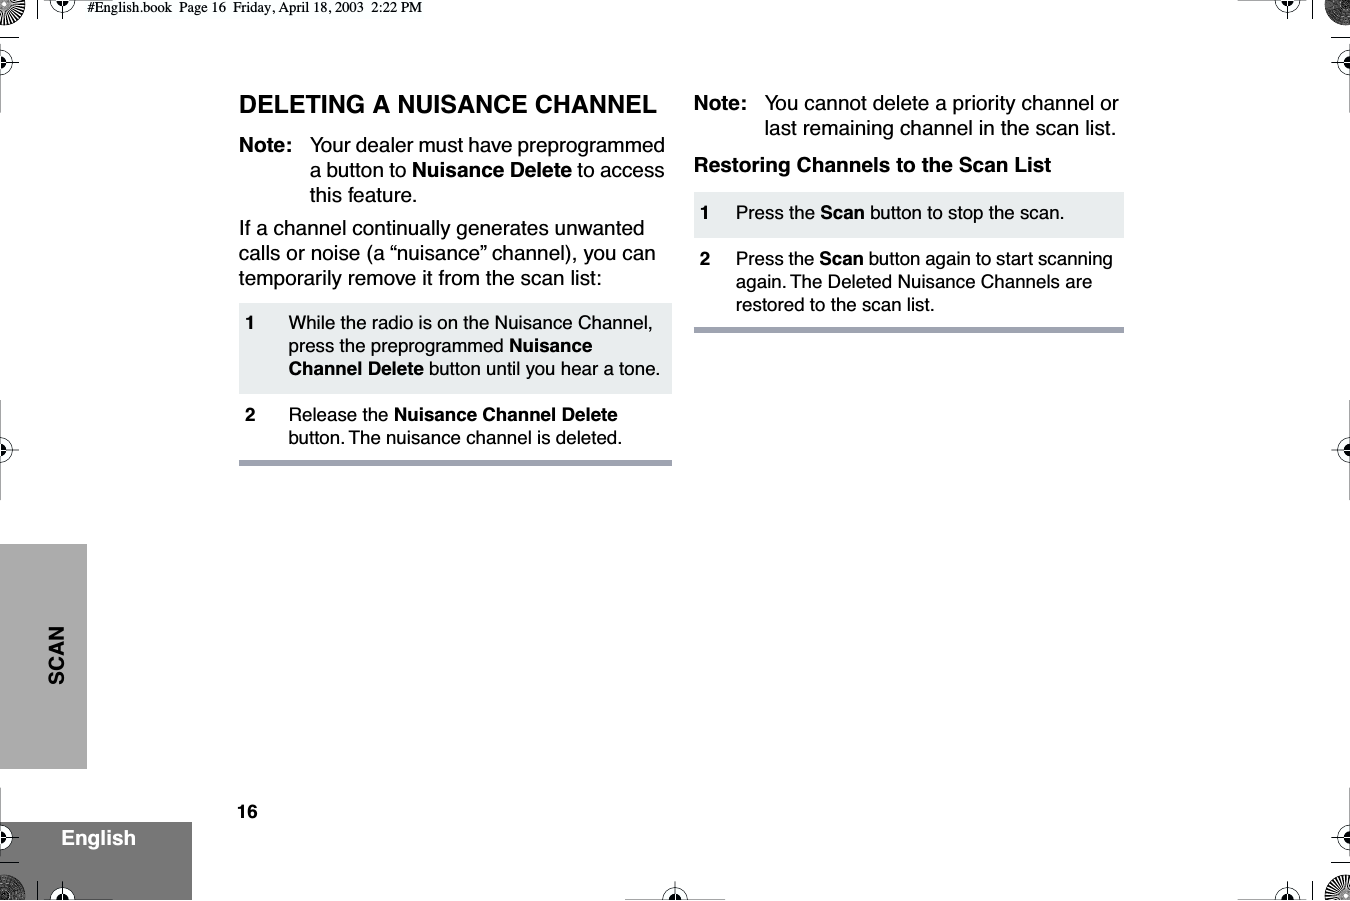 16EnglishSCANDELETING A NUISANCE CHANNELNote: Your dealer must have preprogrammed a button to Nuisance Delete to access this feature.If a channel continually generates unwanted calls or noise (a “nuisance” channel), you can temporarily remove it from the scan list:Note: You cannot delete a priority channel or last remaining channel in the scan list.Restoring Channels to the Scan List1While the radio is on the Nuisance Channel, press the preprogrammed Nuisance Channel Delete button until you hear a tone.2Release the Nuisance Channel Delete button. The nuisance channel is deleted.1Press the Scan button to stop the scan.2Press the Scan button again to start scanning again. The Deleted Nuisance Channels are restored to the scan list.#English.book  Page 16  Friday, April 18, 2003  2:22 PM